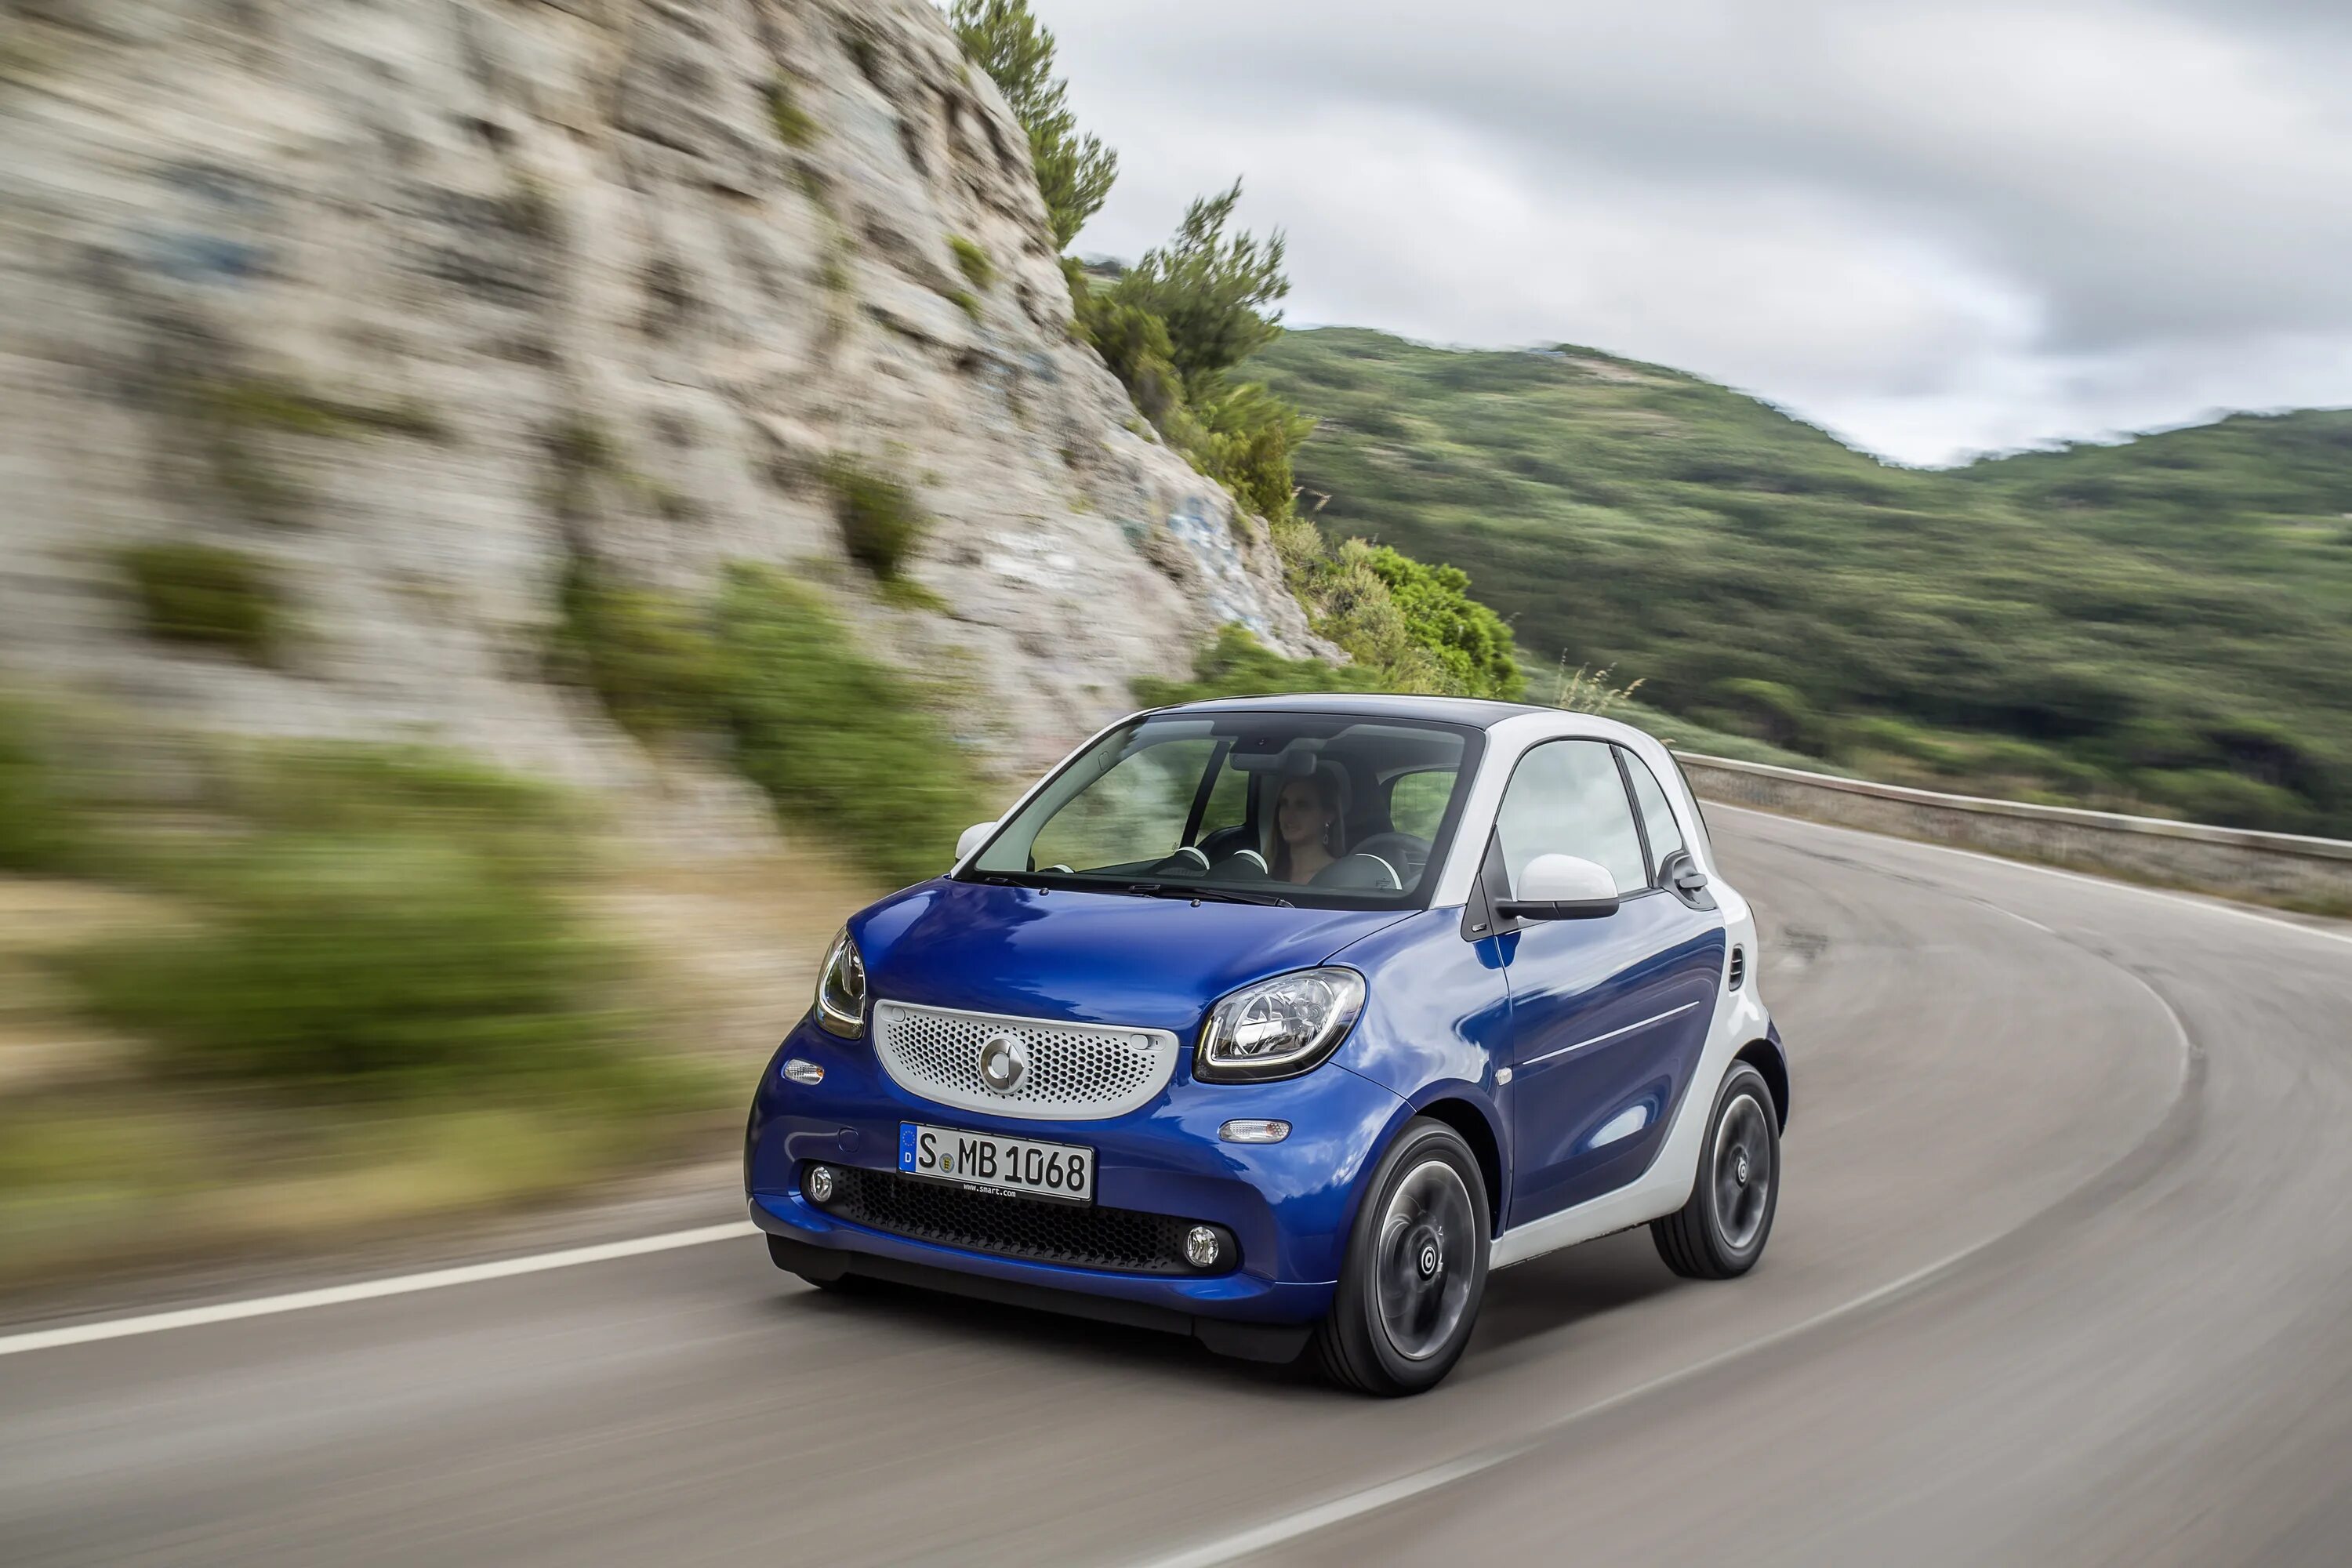 Smart Fortwo. Smart Fortwo 2014. Car Smart Fortwo 2015. Smart Fortwo Coupe 2016.